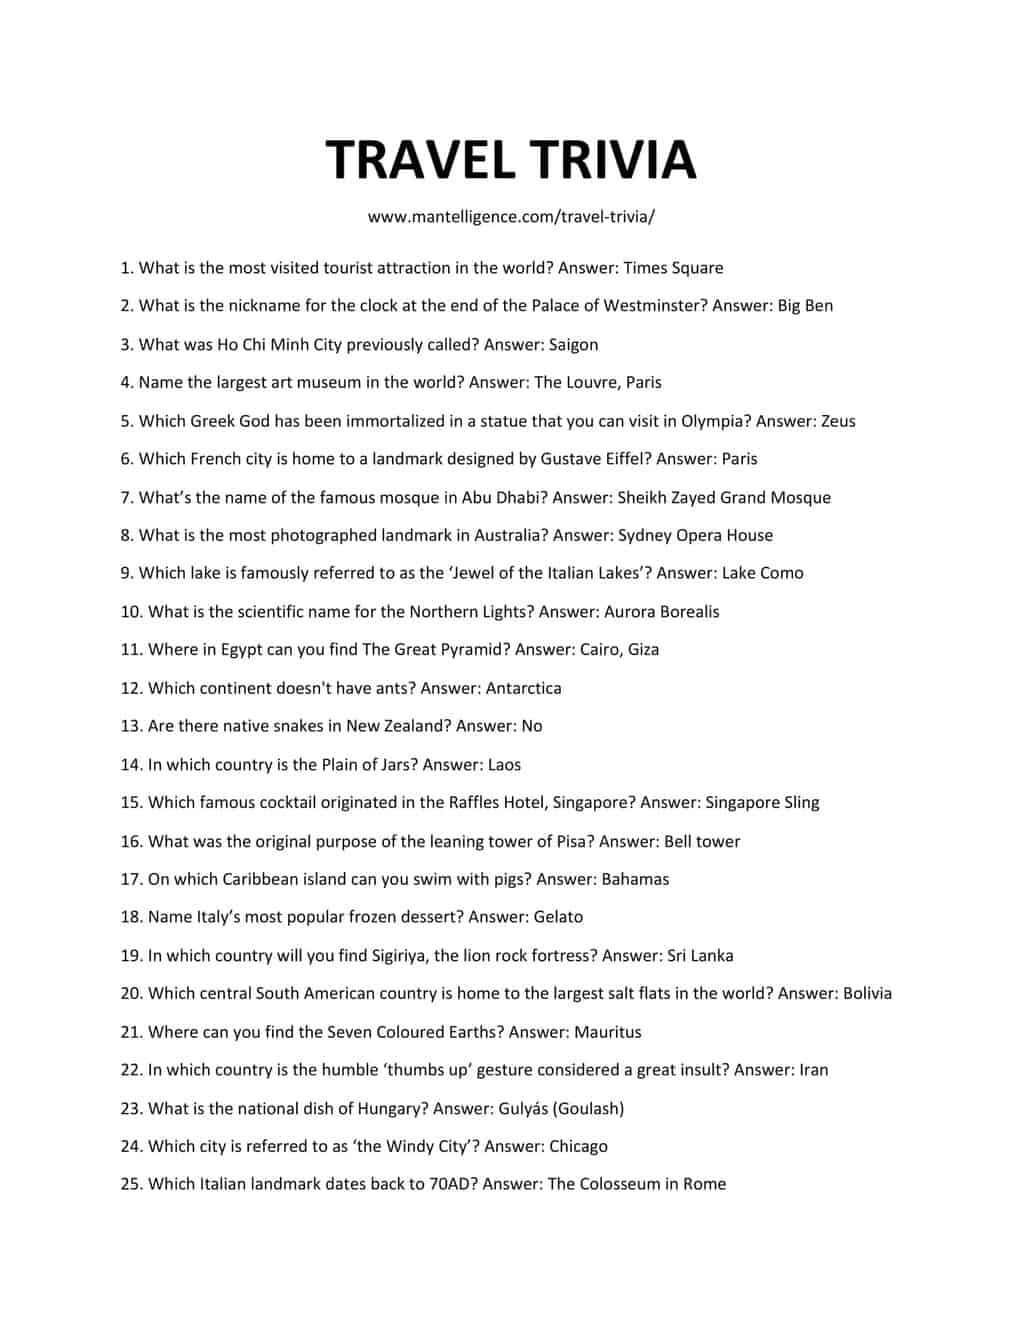 Downloadable and printable list of Travel Trivia